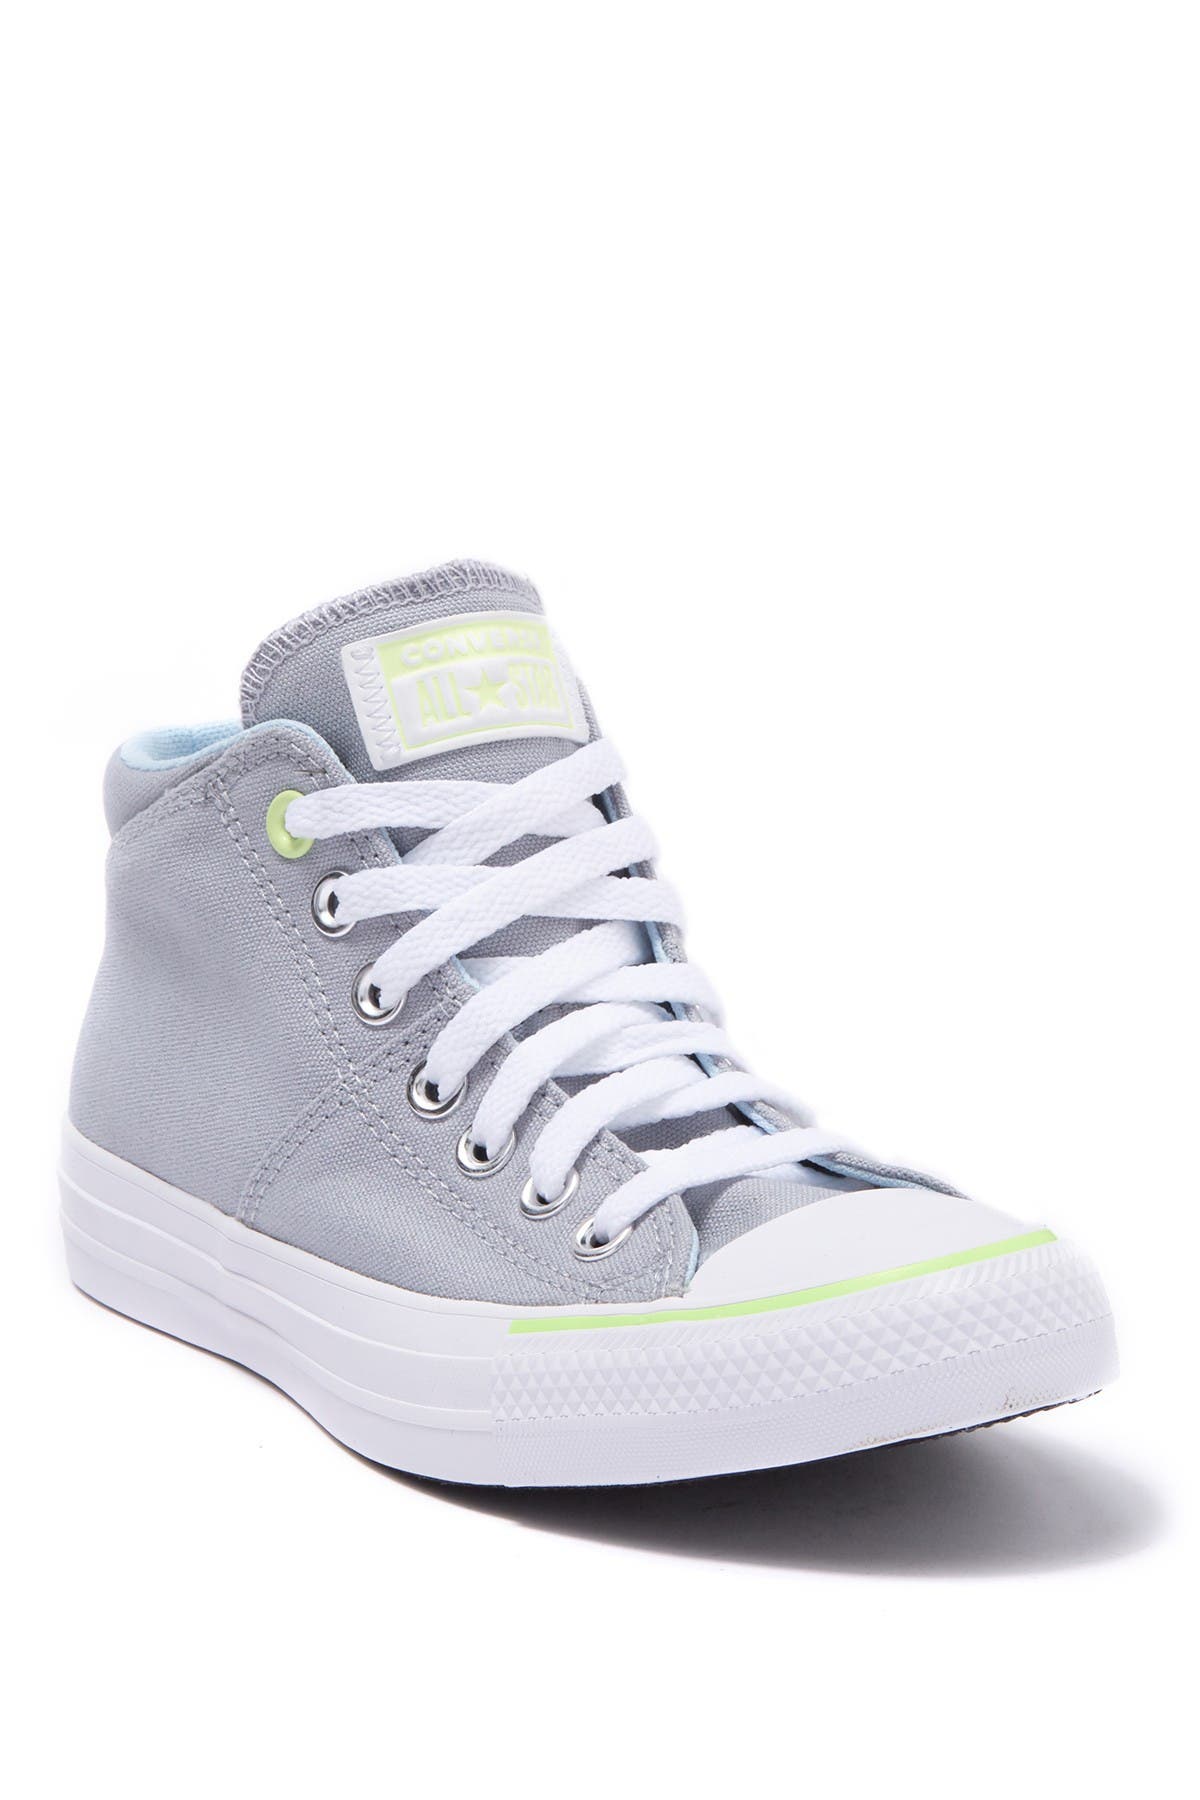 converse madison sneakers